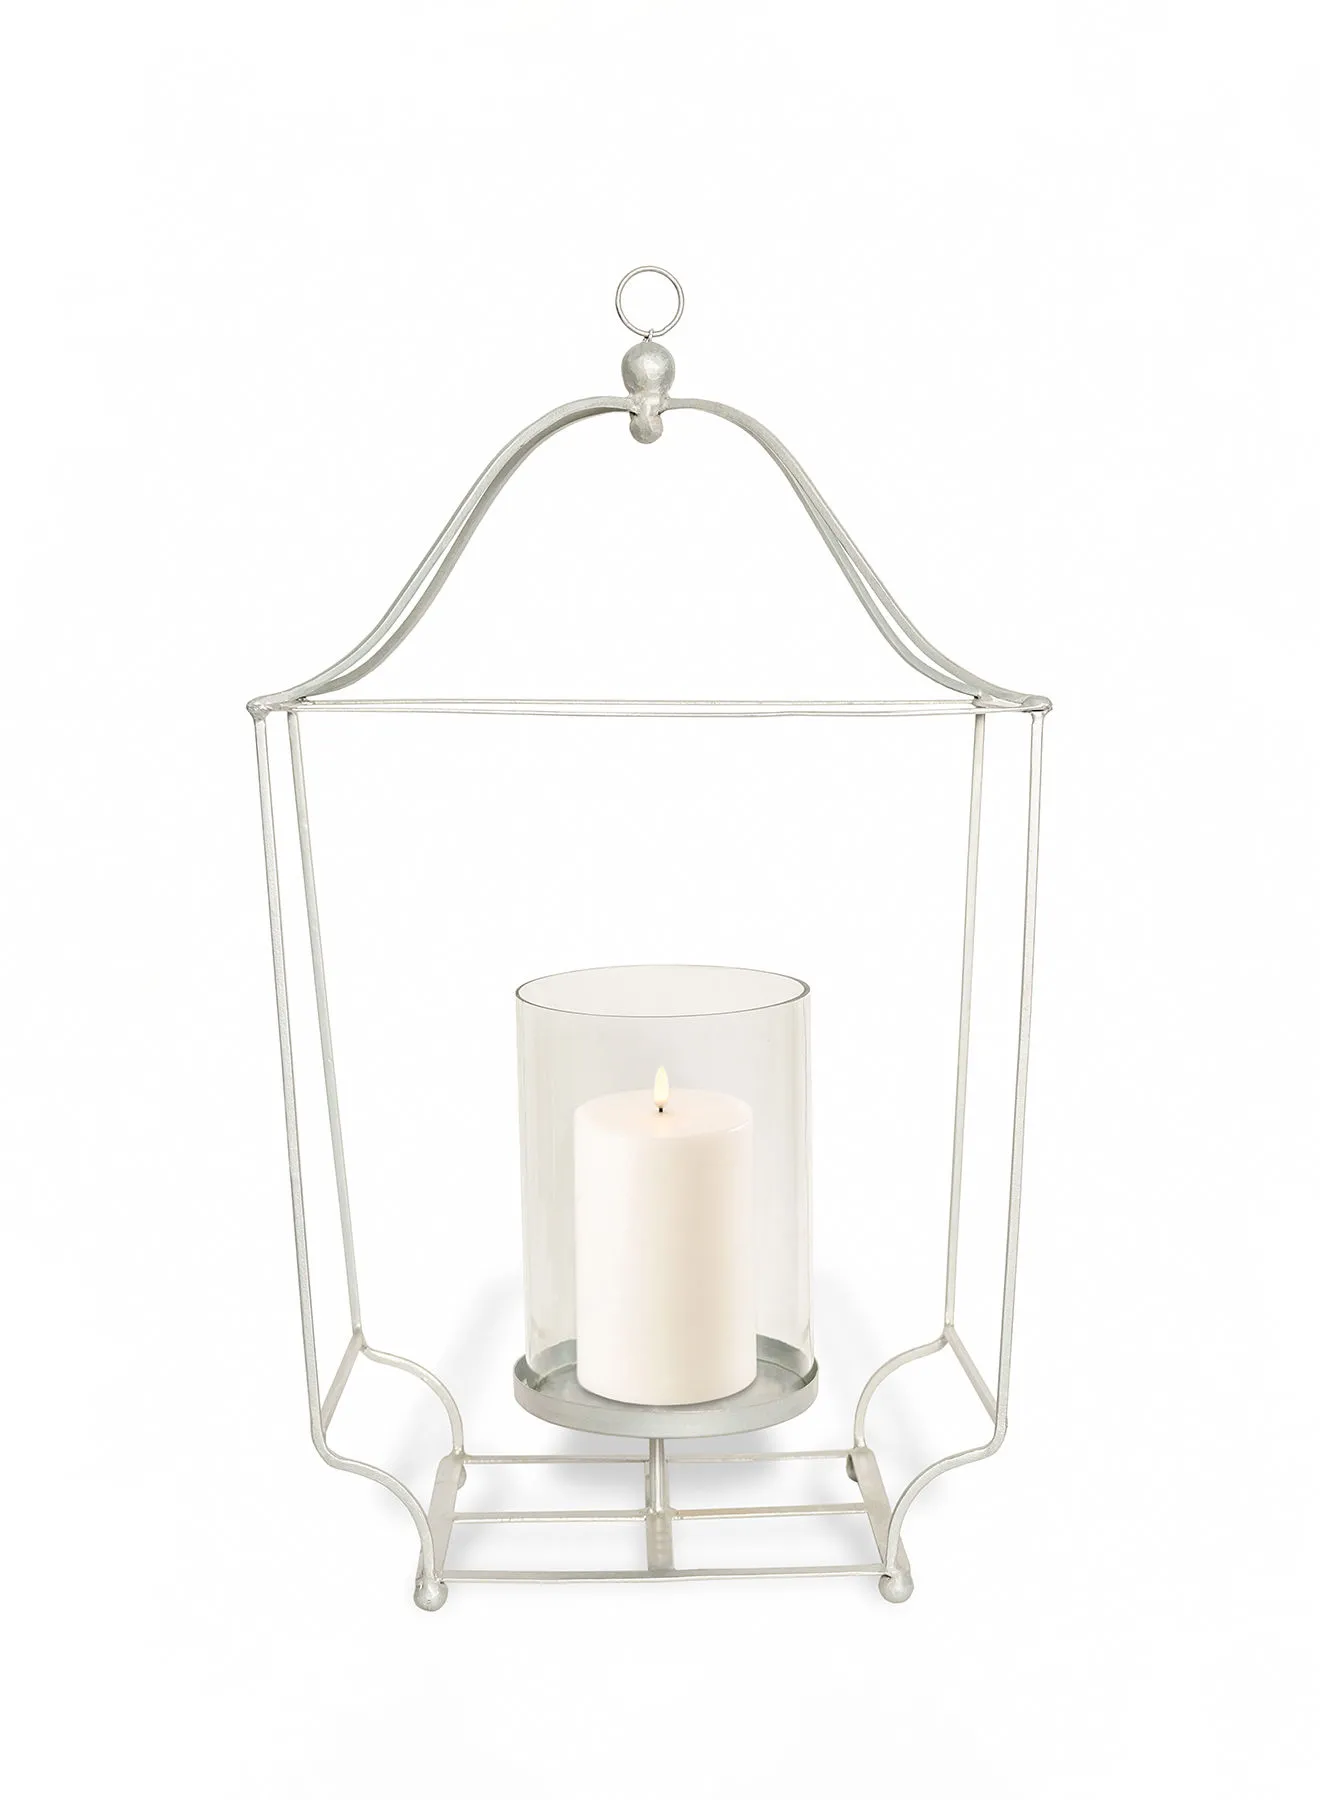 ebb & flow Modern Ideal Design Handmade Lantern  Unique Luxury Quality Scents For The Perfect Stylish Home Silver 10X9X27centimeter